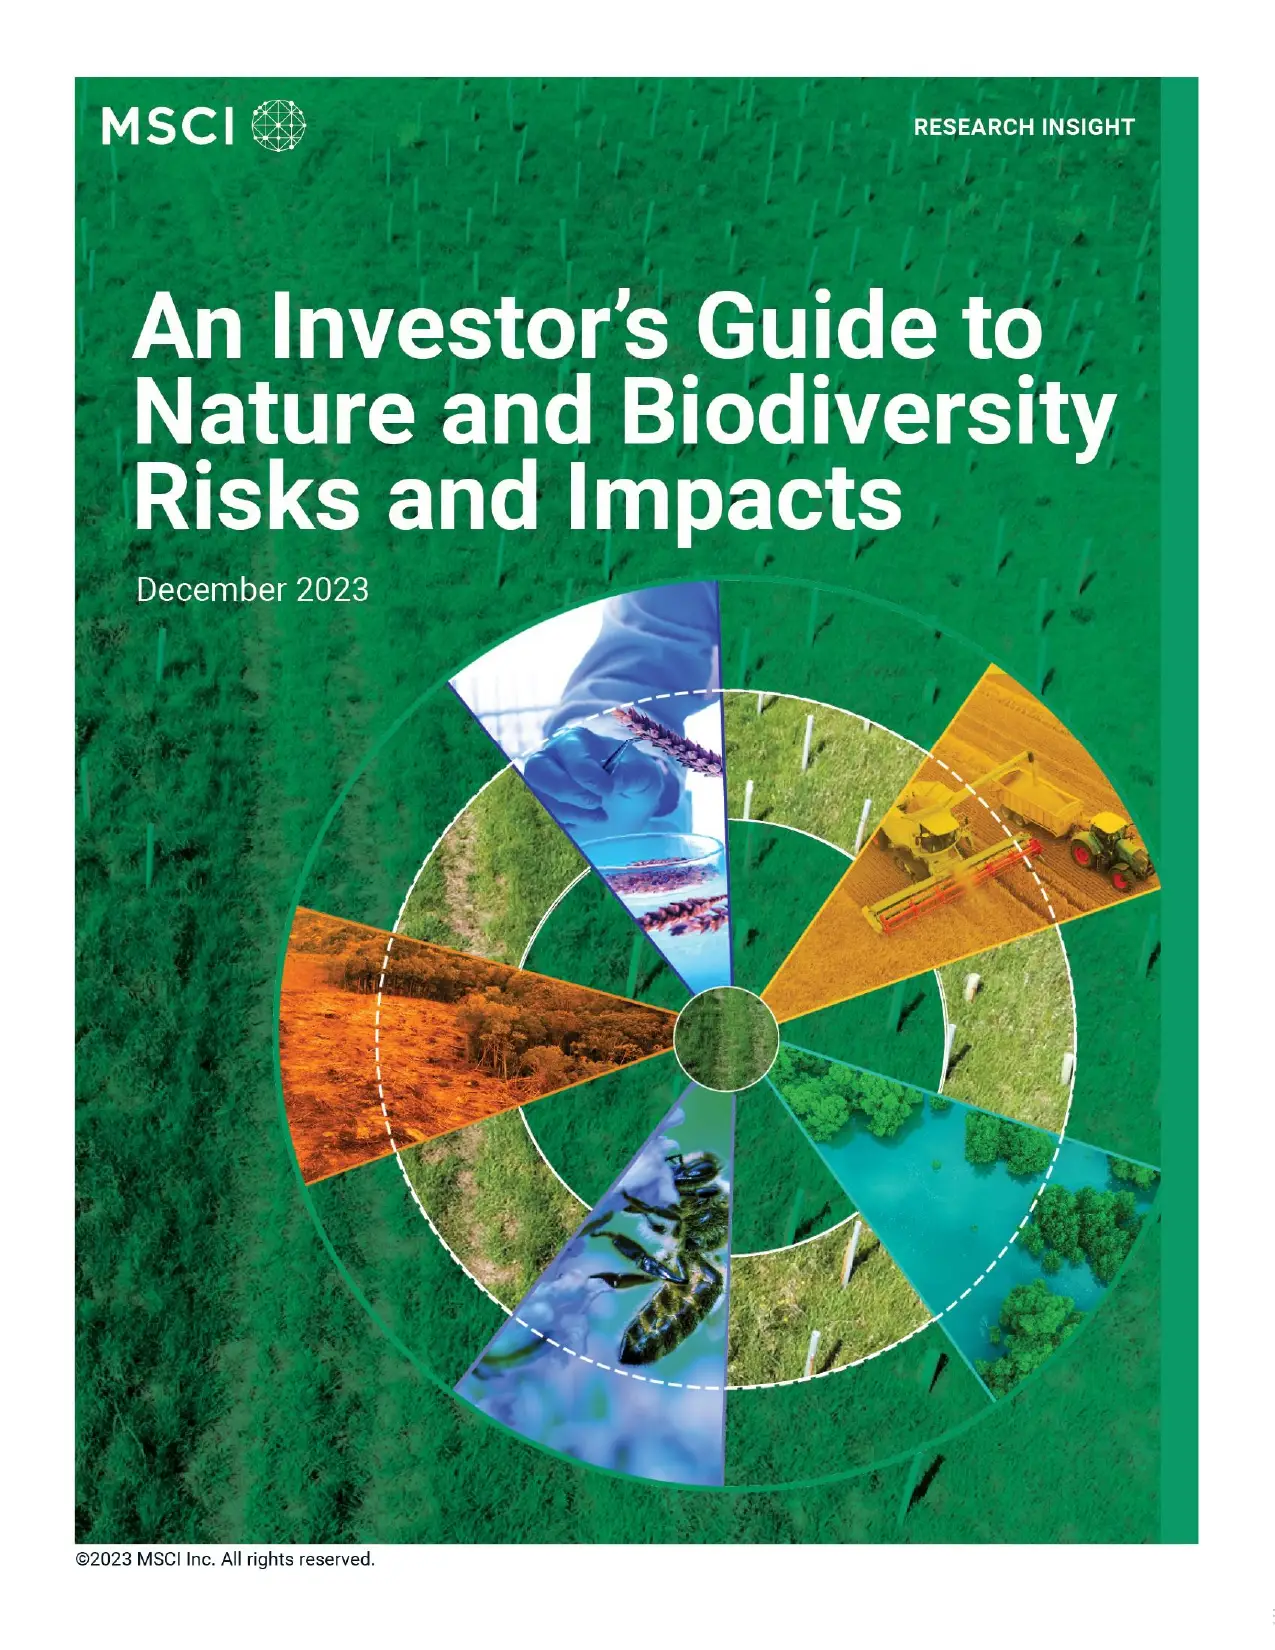 An Investor's Guide To Nature And Biodiversity Risks And Impacts